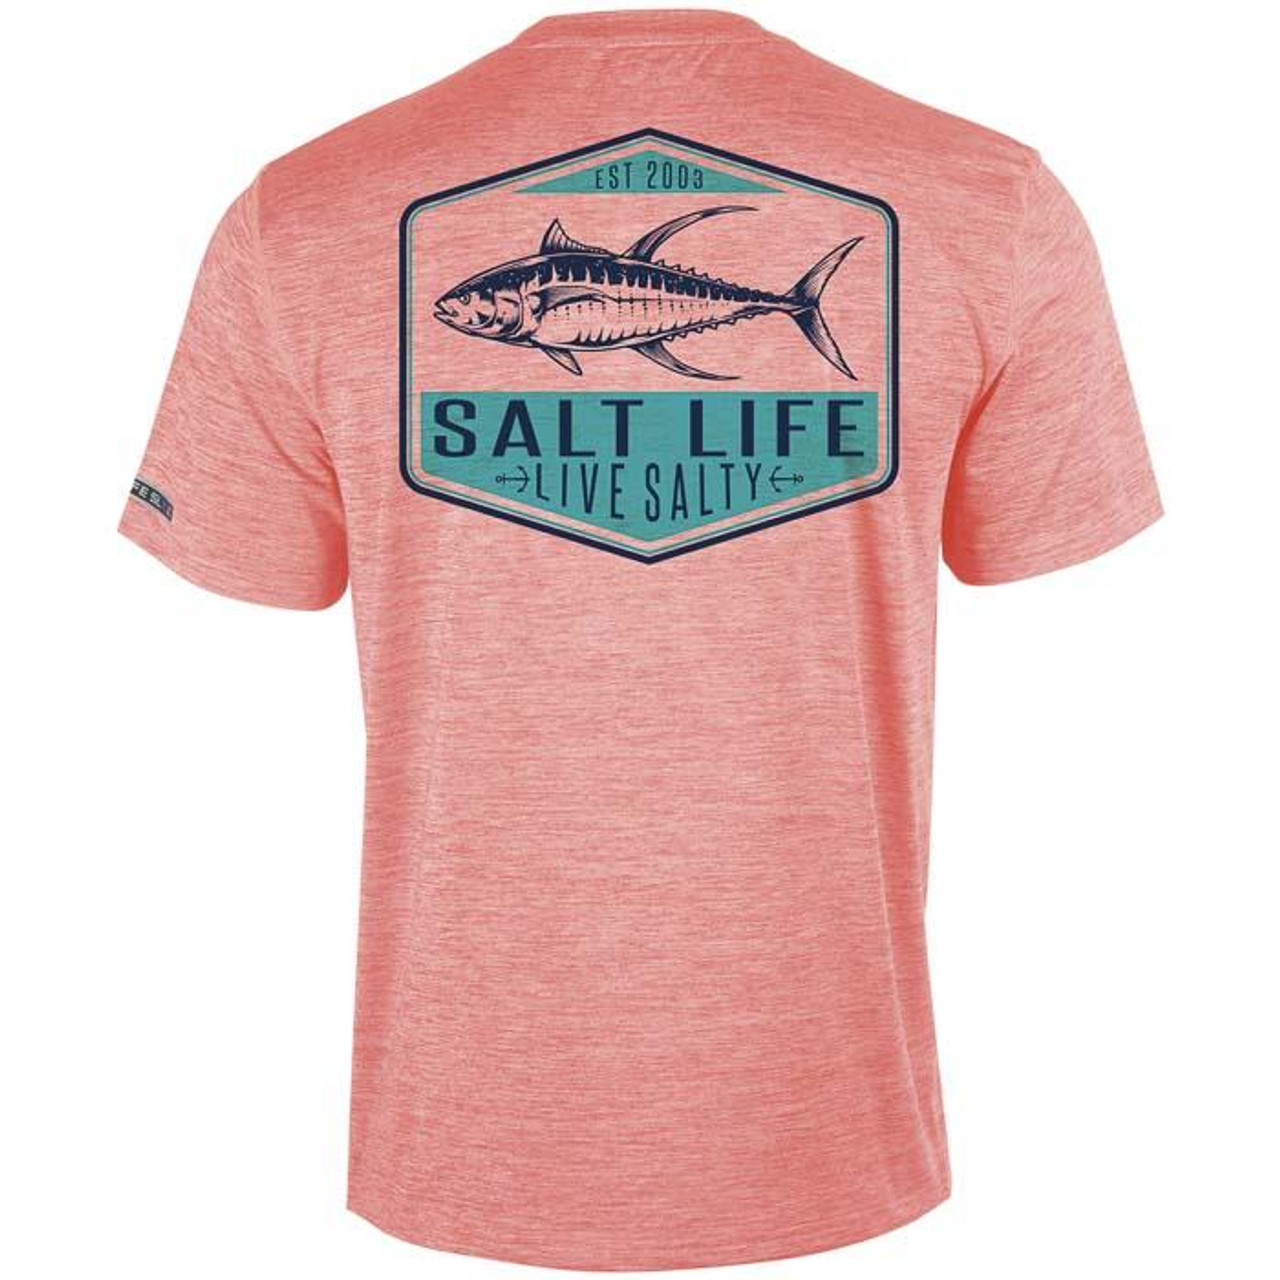 https://cdn11.bigcommerce.com/s-mdle1ql08i/images/stencil/1280x1280/products/6718/9691/salt-life-t-shirt-tunability-slx-coral-heather-turquoise-tee__76872.1643254788.jpg?c=2?imbypass=on